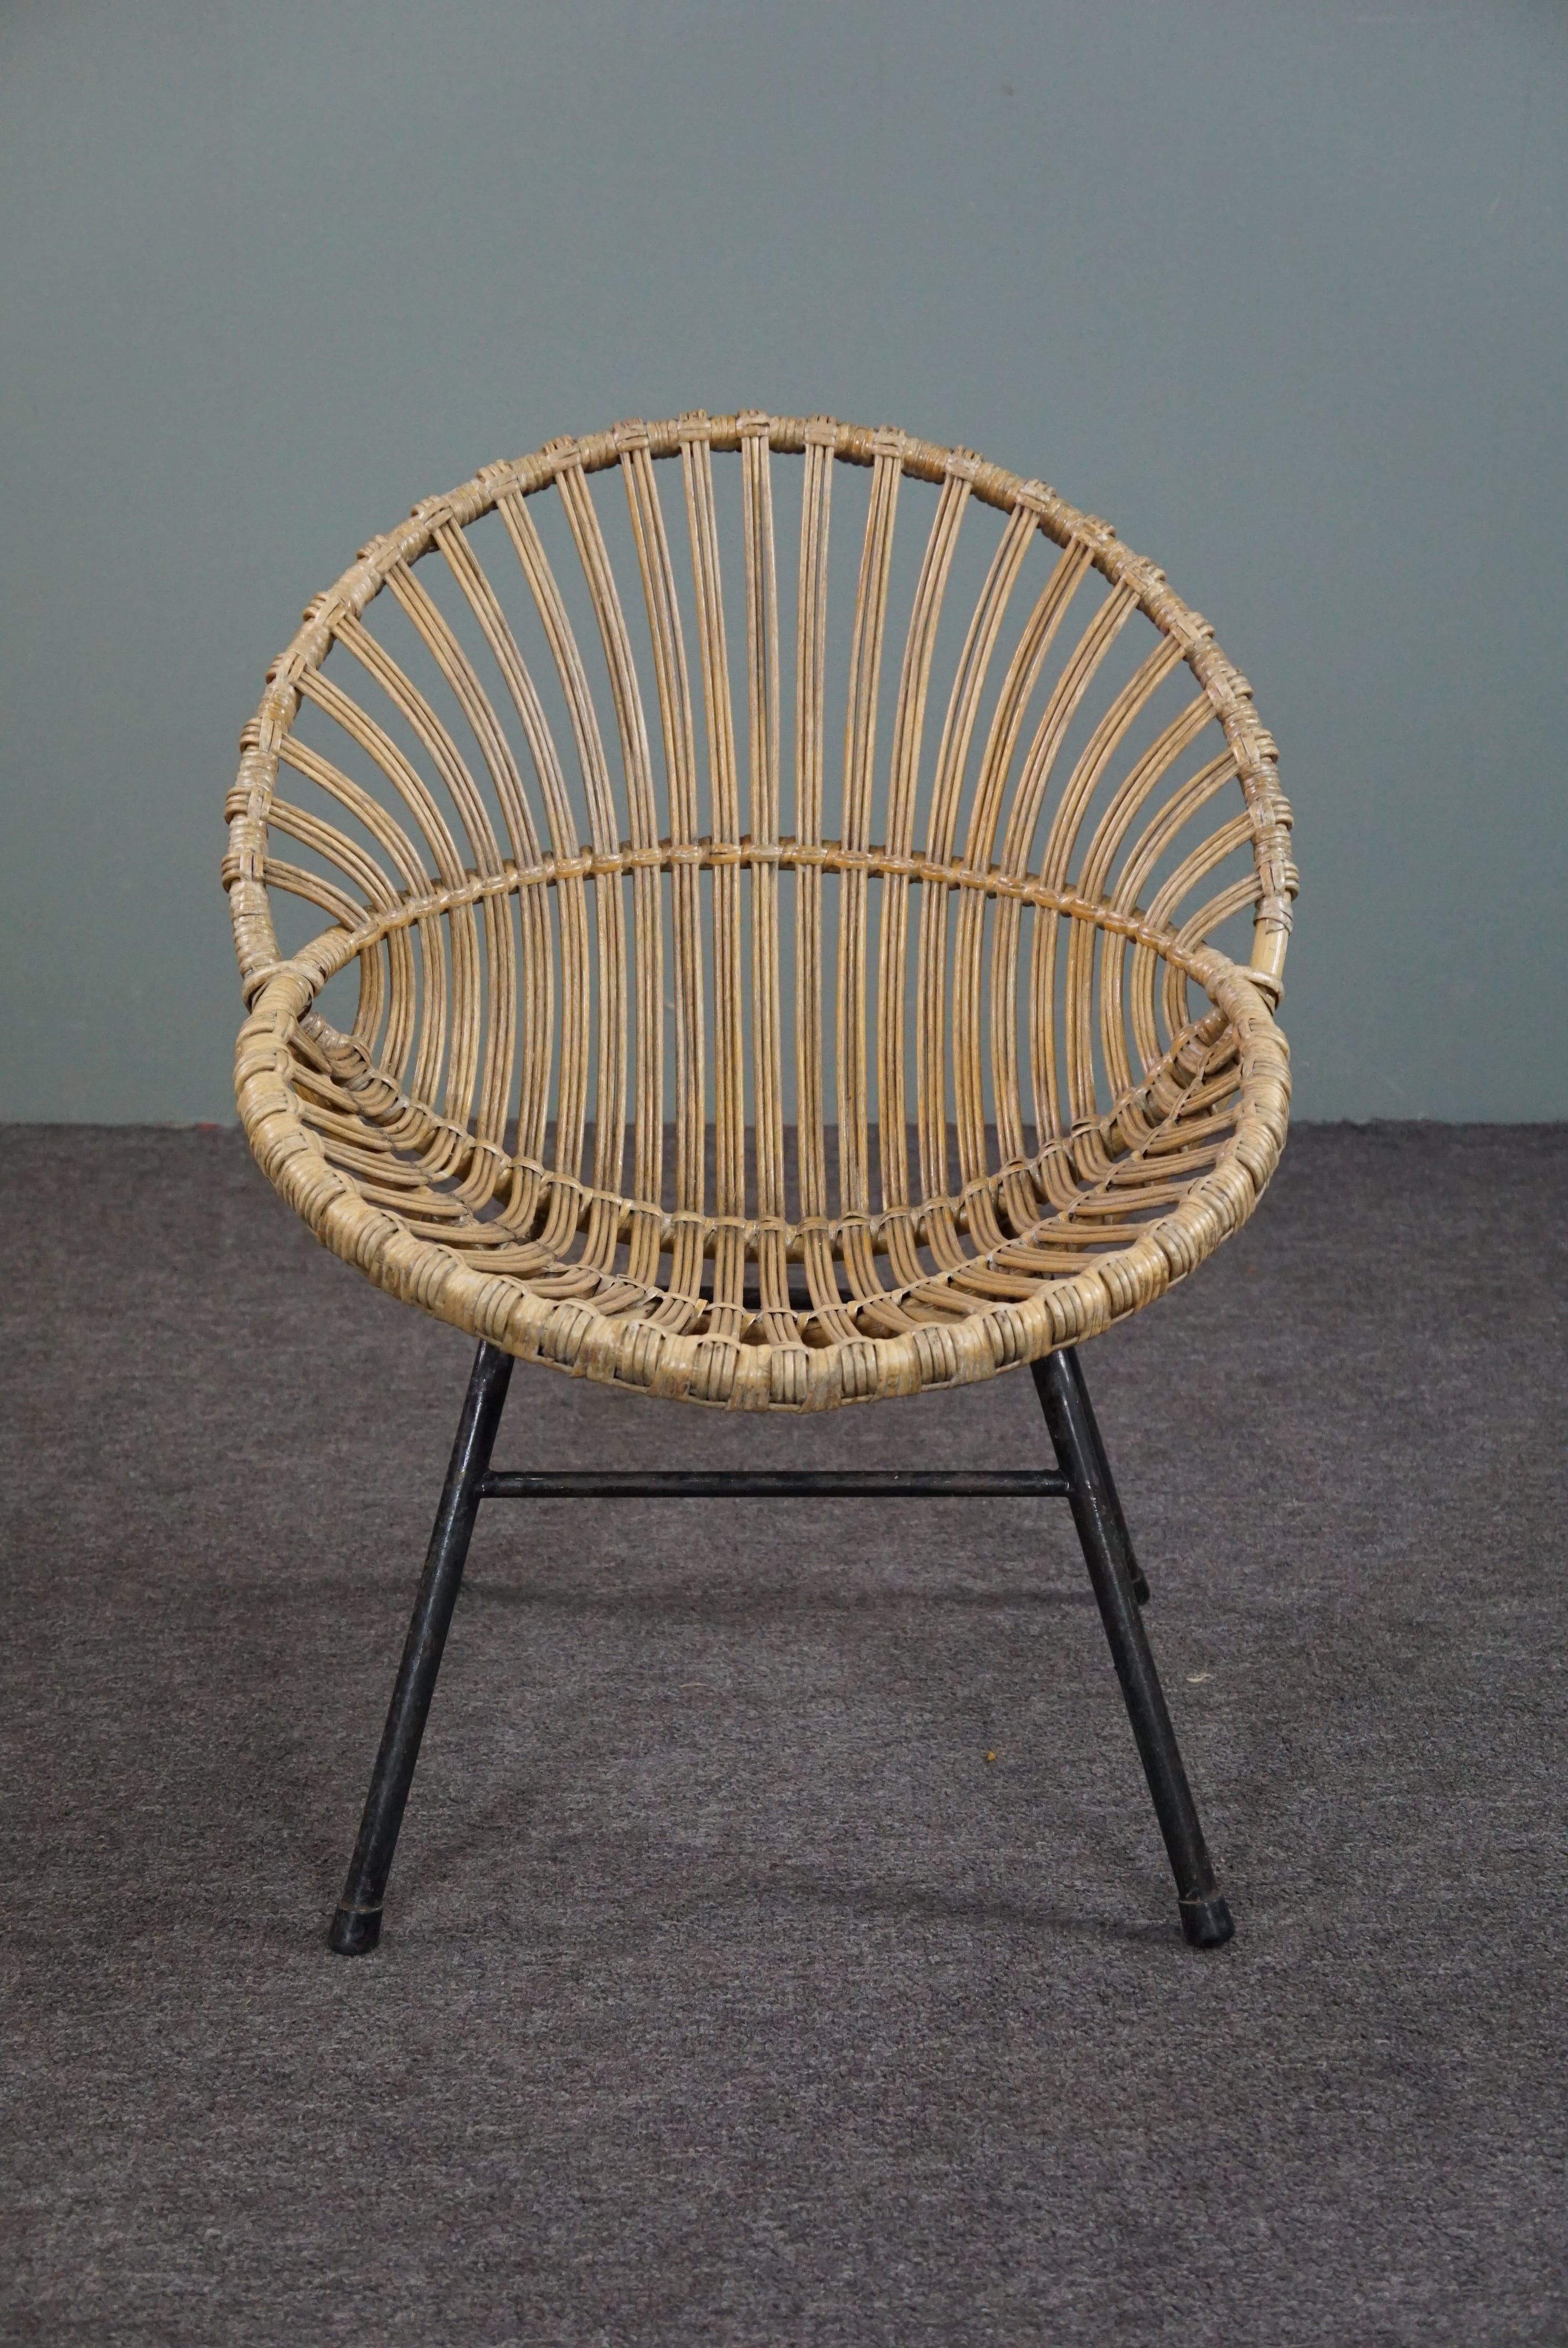 This rattan armchair has its own unique look thanks to the double bars. The seating comfort is very pleasant. The open character of this chair also gives a spatial effect to your living room, garden room or canopy. You can also decorate this